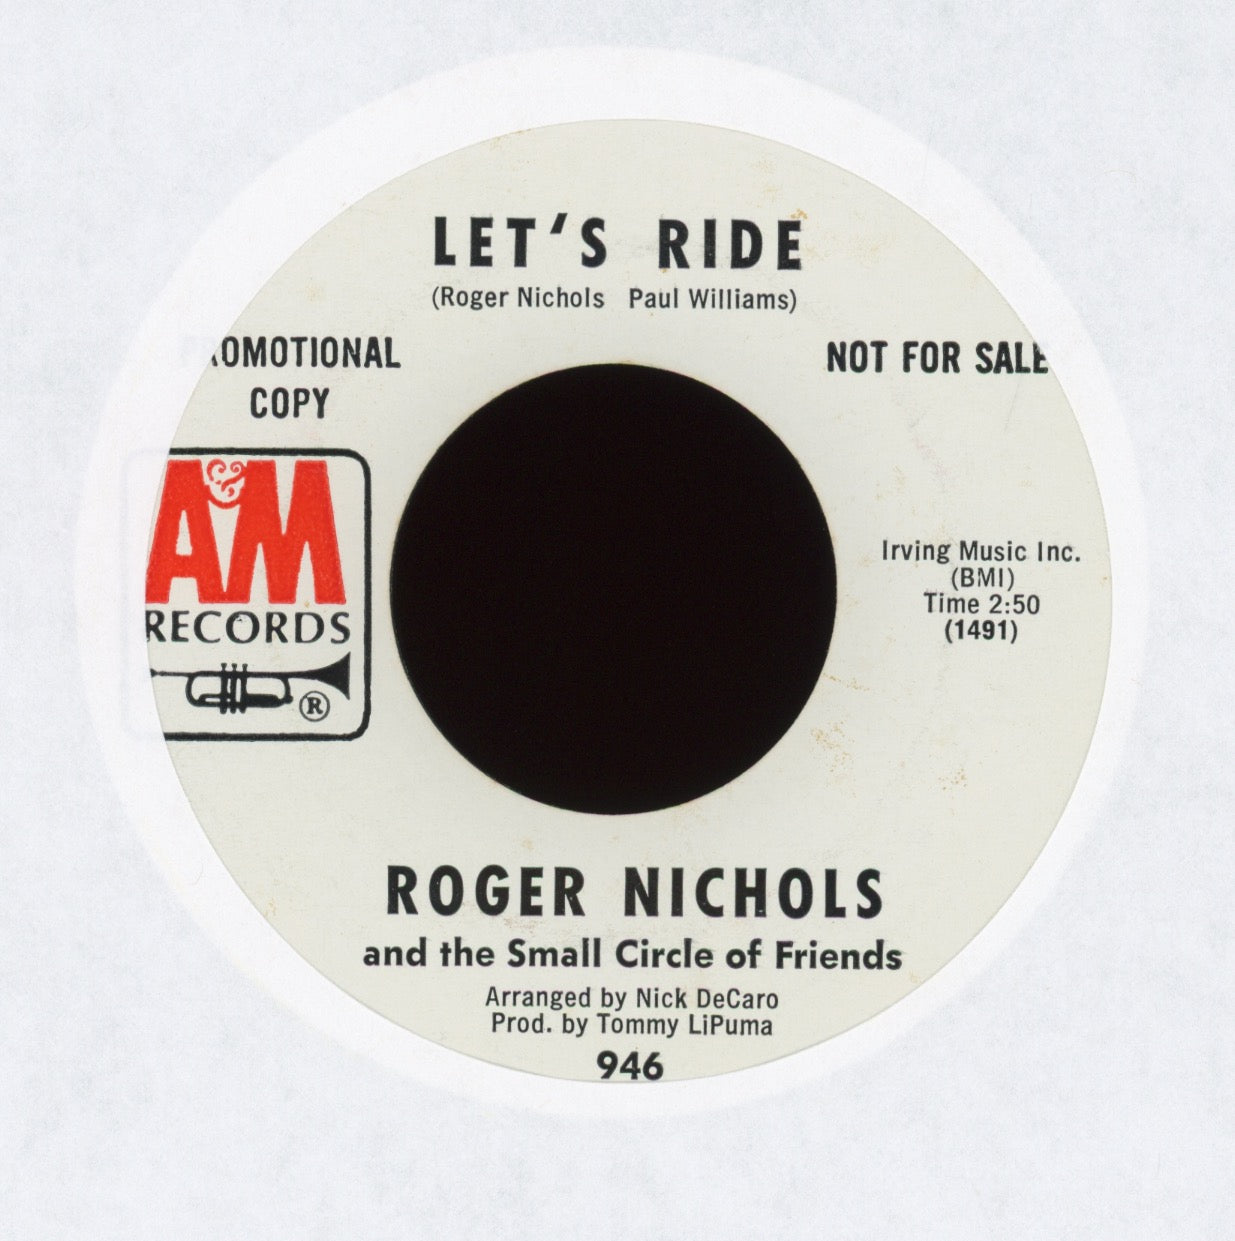 Roger Nichols & The Small Circle Of Friends - Let's Ride on A&M Promo Sunshine Pop 45